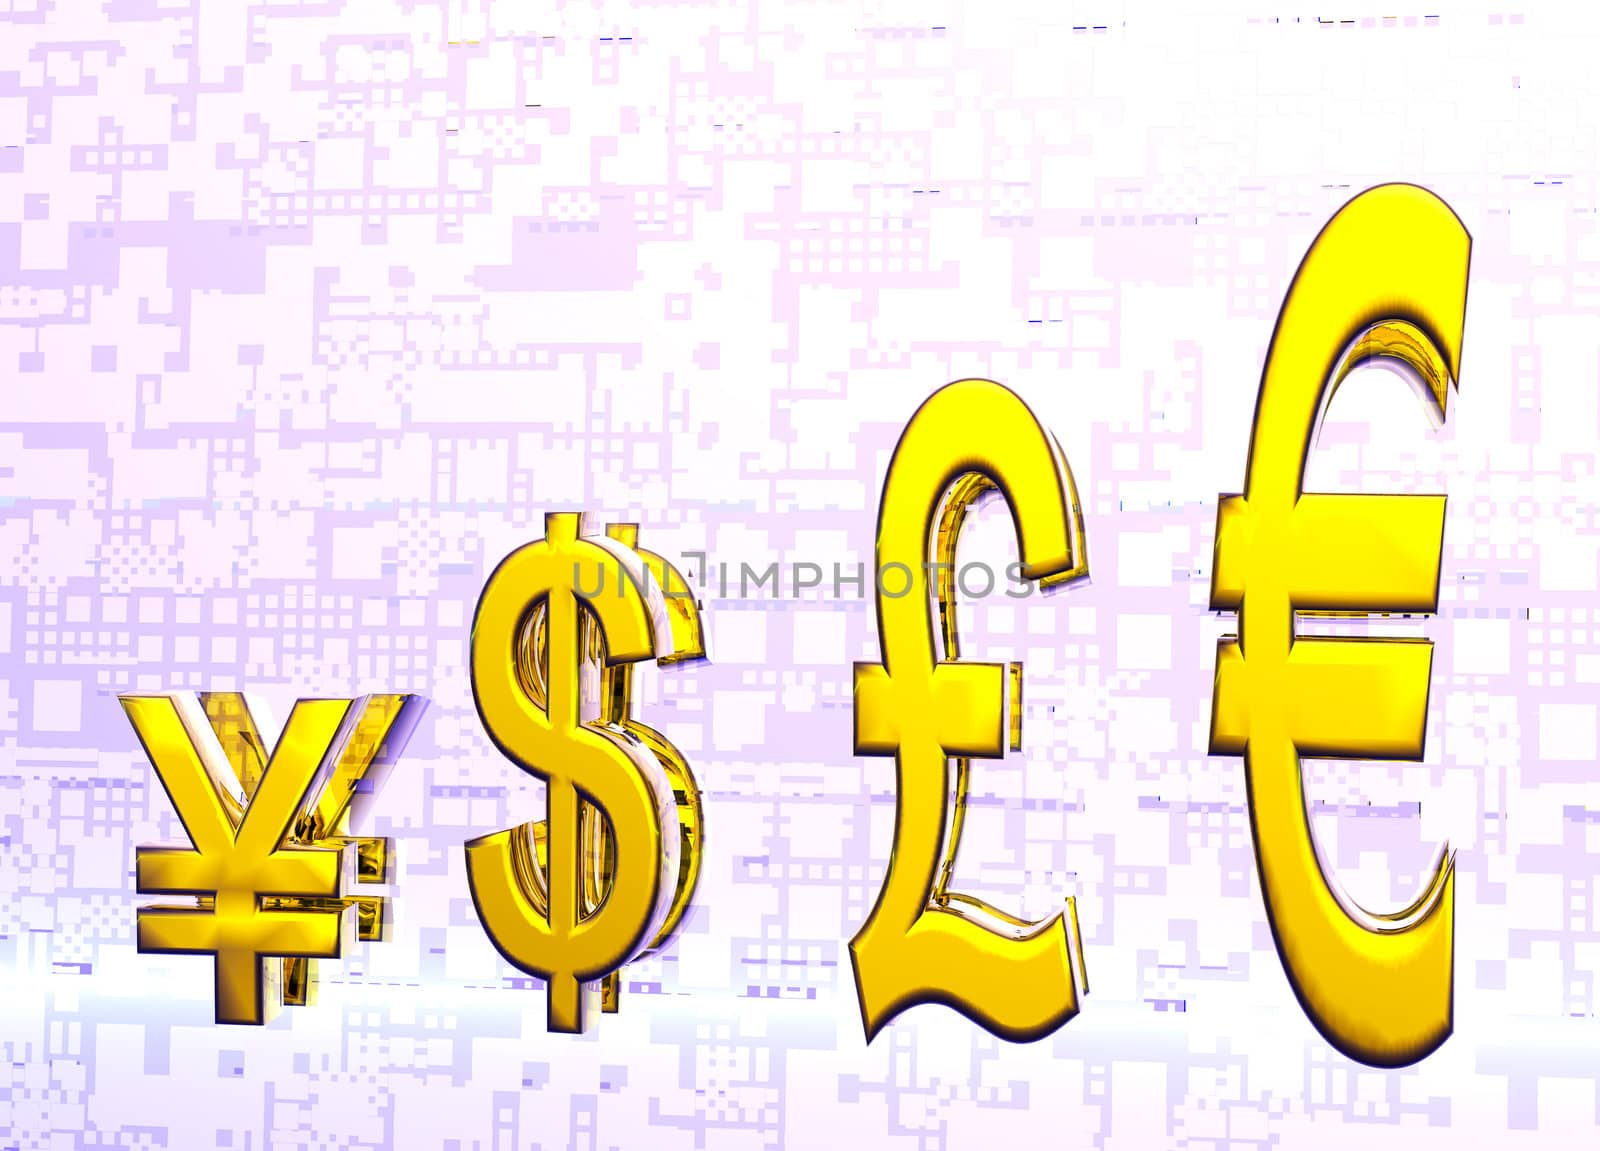 Euro Pound Dollar and Yen Symbols in Gold with Reflection in Graph or Chart Format